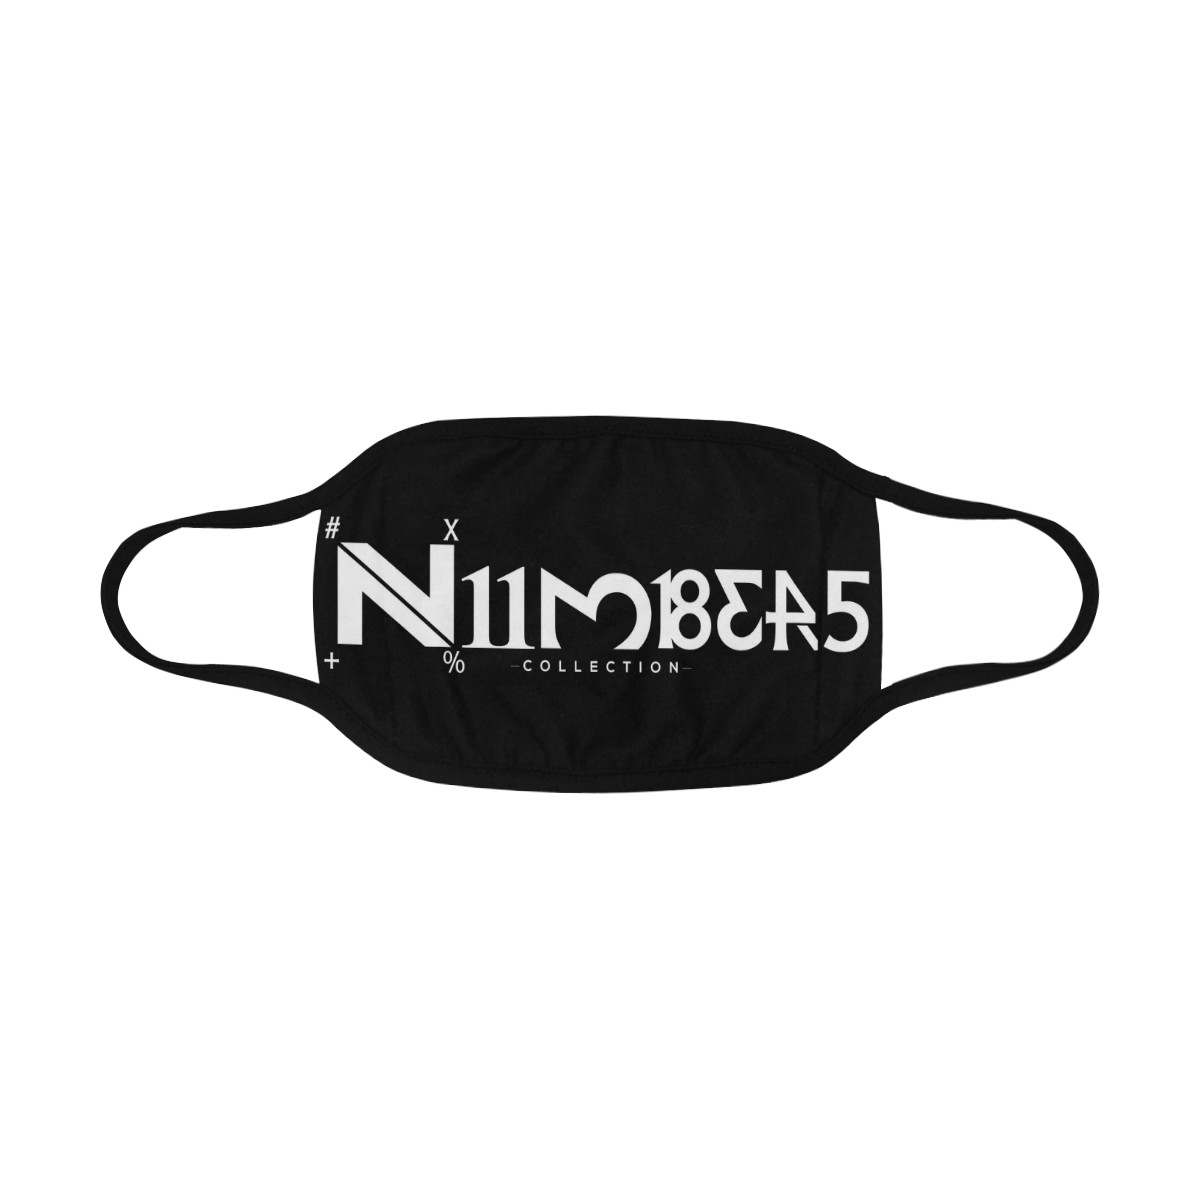 NUMBERS Collection Black/White Mouth Mask